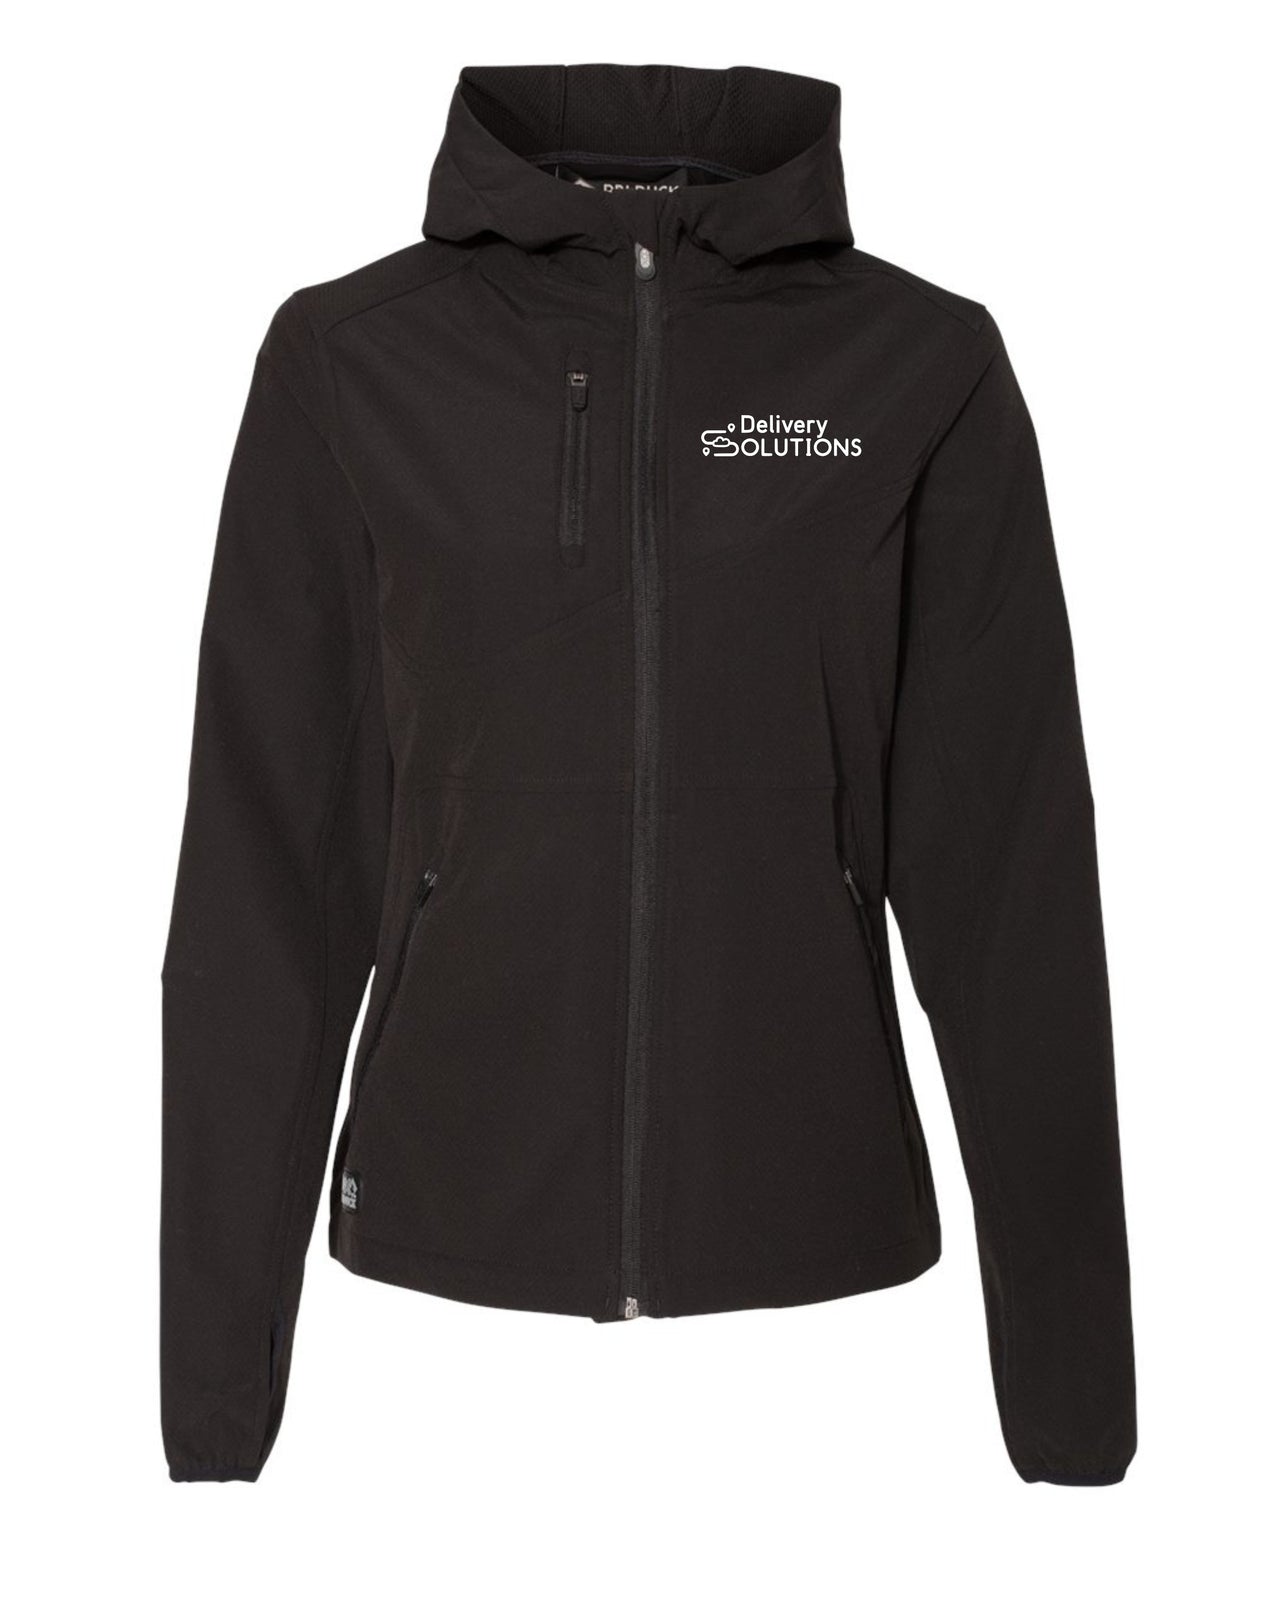 Ladies - Ascent Soft Shell Hooded Jacket - Dri Duck (Delivery Solutions)